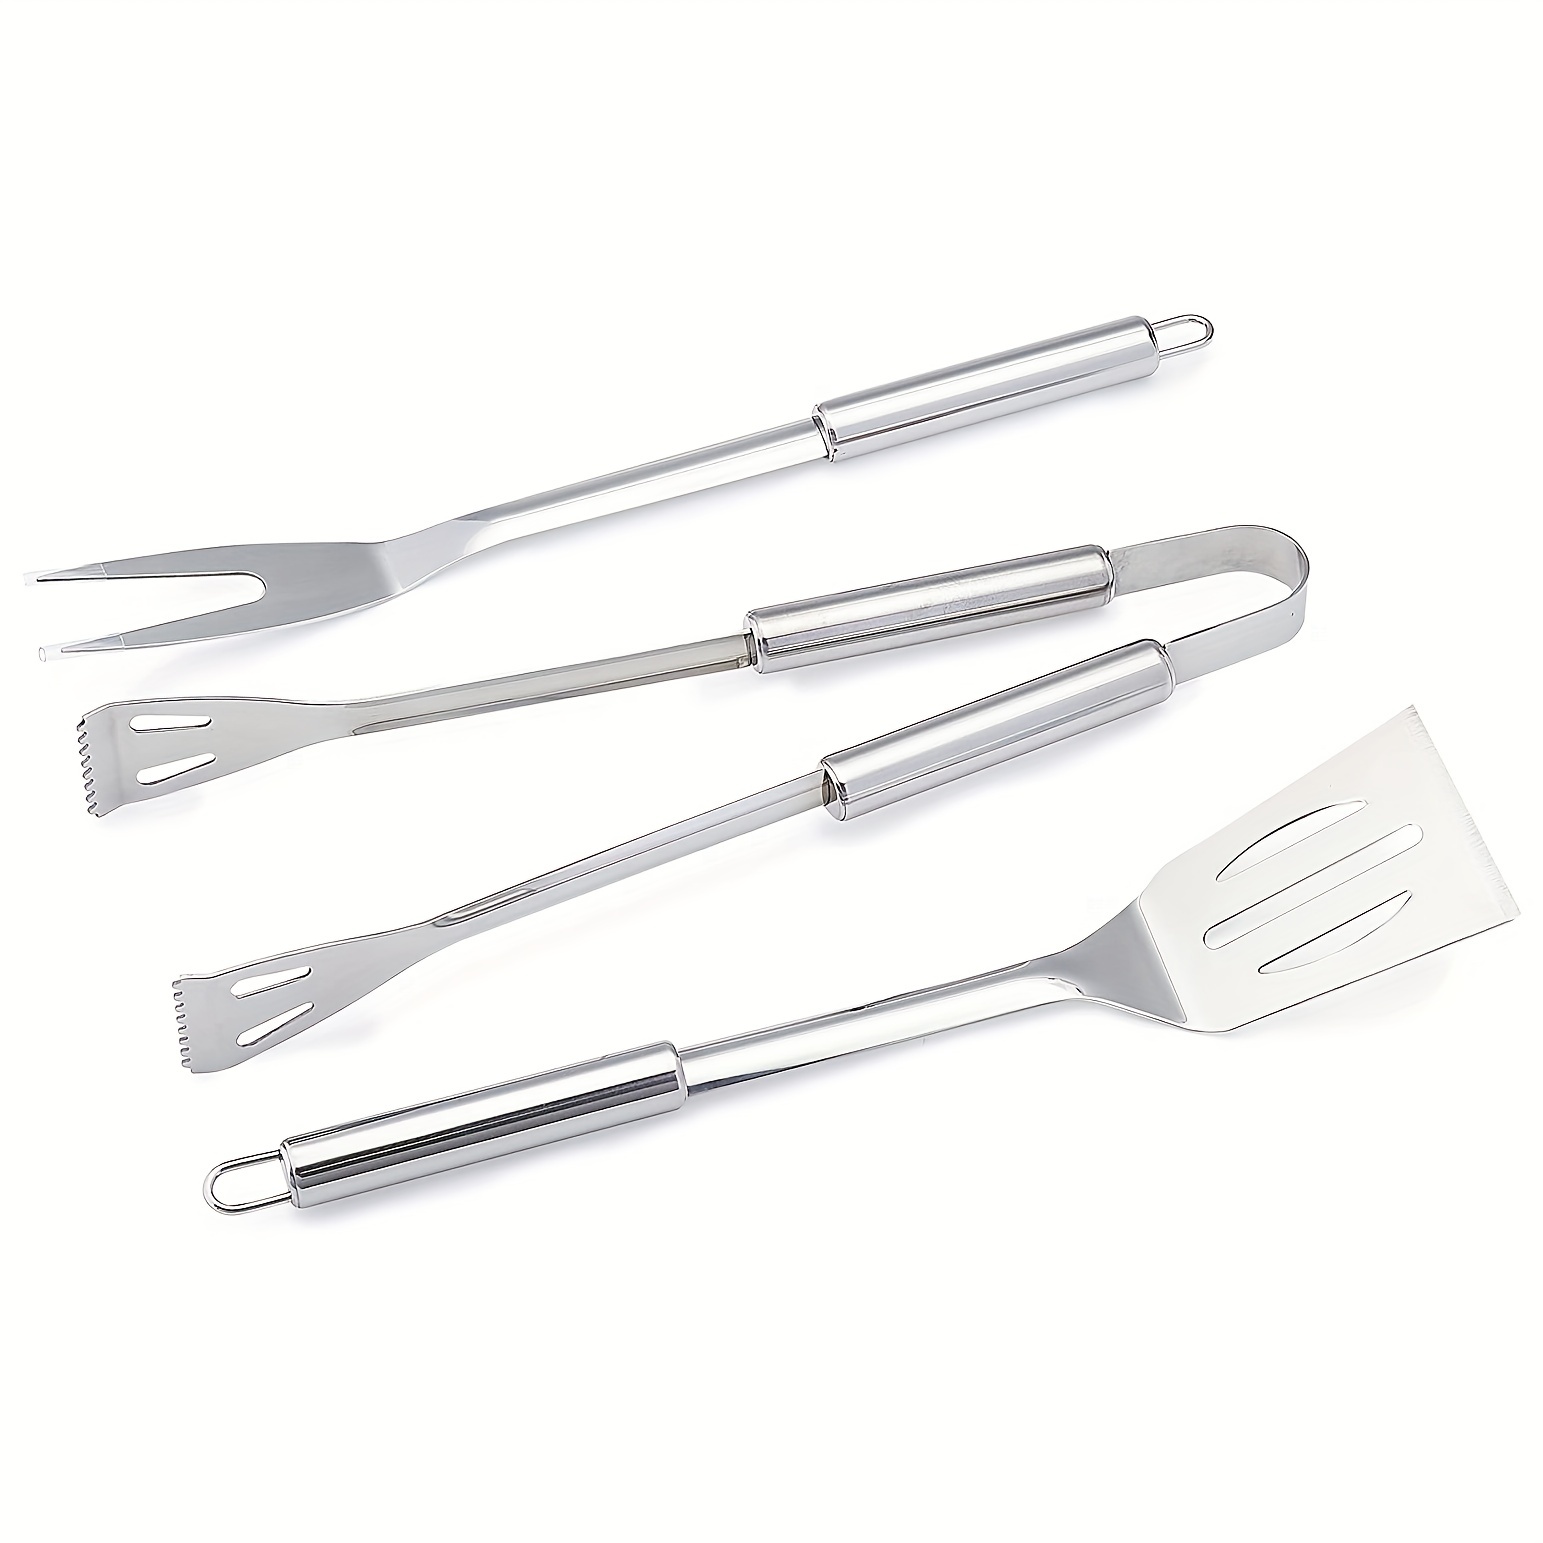 BBQ Grill Utensils Set, 3 PCS Stainless Steel Kit with Spatula, Tongs, and  Fork - Rust-Proof and Durable Accessories for Outdoor Barbecue